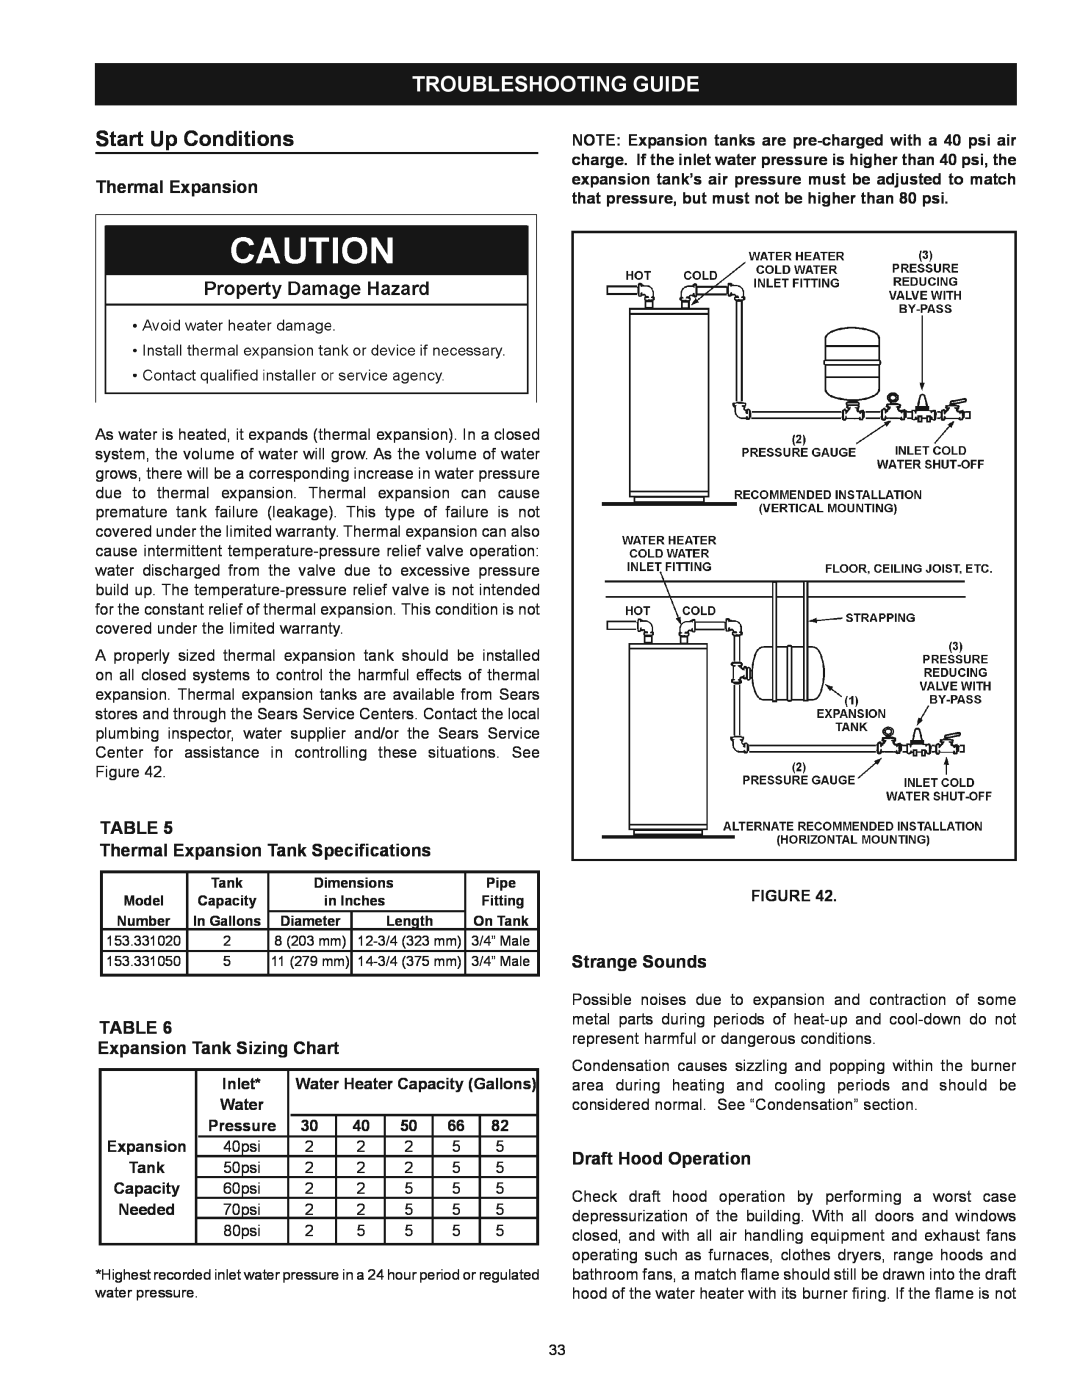 Kenmore 153.339372 Troubleshooting Guide, Start Up Conditions, Inlet, Water Heater Capacity Gallons, Expansion, Pressure 